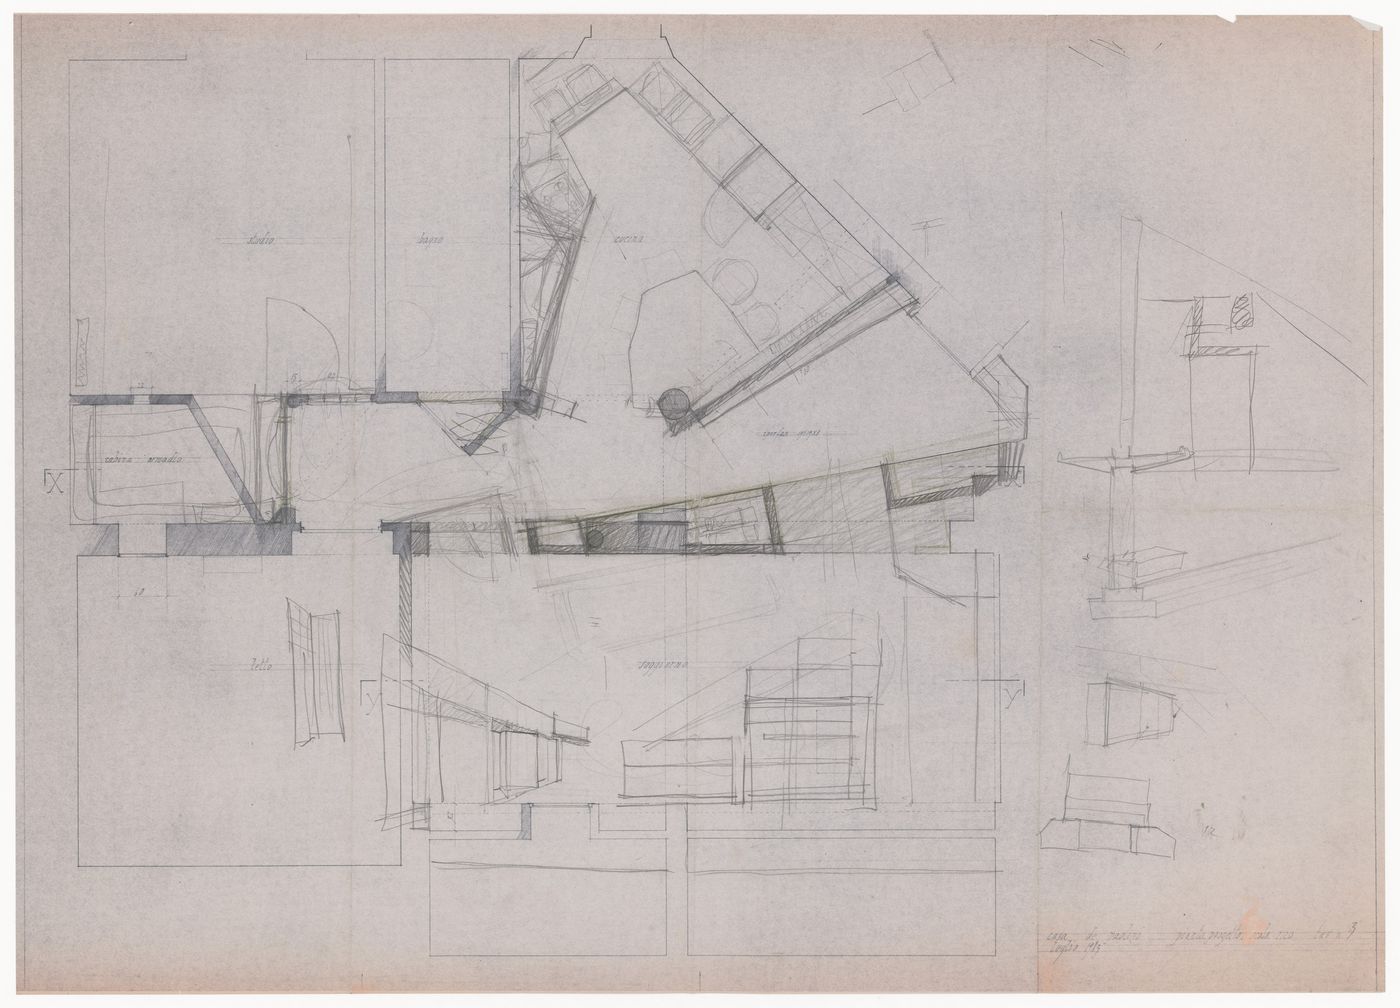 Plan, perspective and section for Casa De Paolini, Milan, Italy